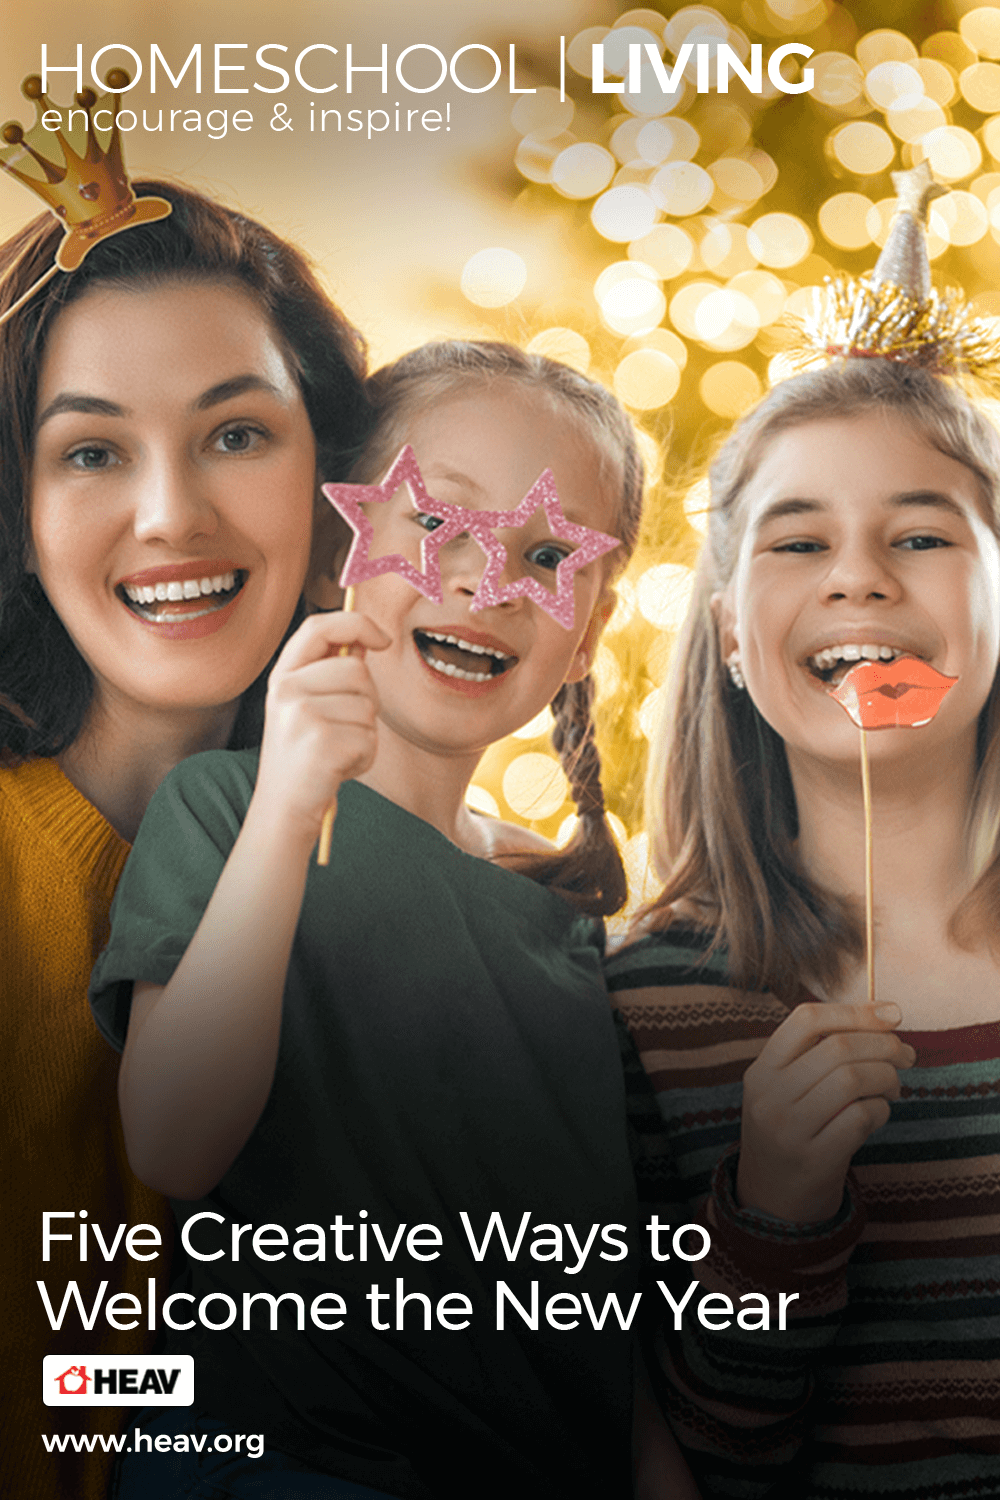 Five Creative Ways to Welcome the New Year homeschool living pinterest